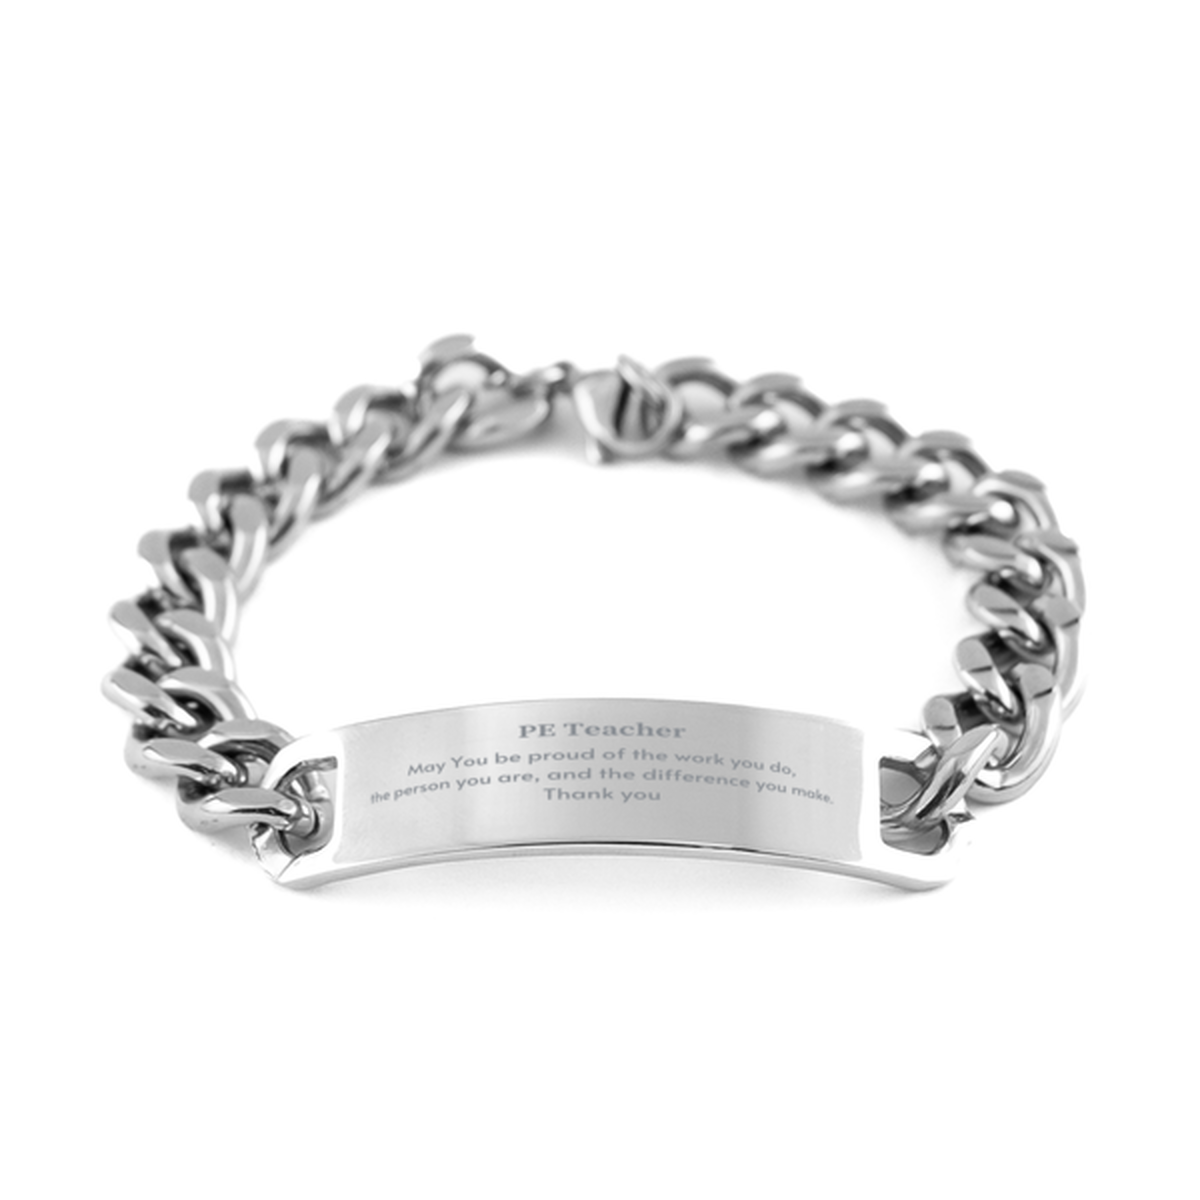 Heartwarming Cuban Chain Stainless Steel Bracelet Retirement Coworkers Gifts for PE Teacher, PE Teacher May You be proud of the work you do, the person you are Gifts for Boss Men Women Friends